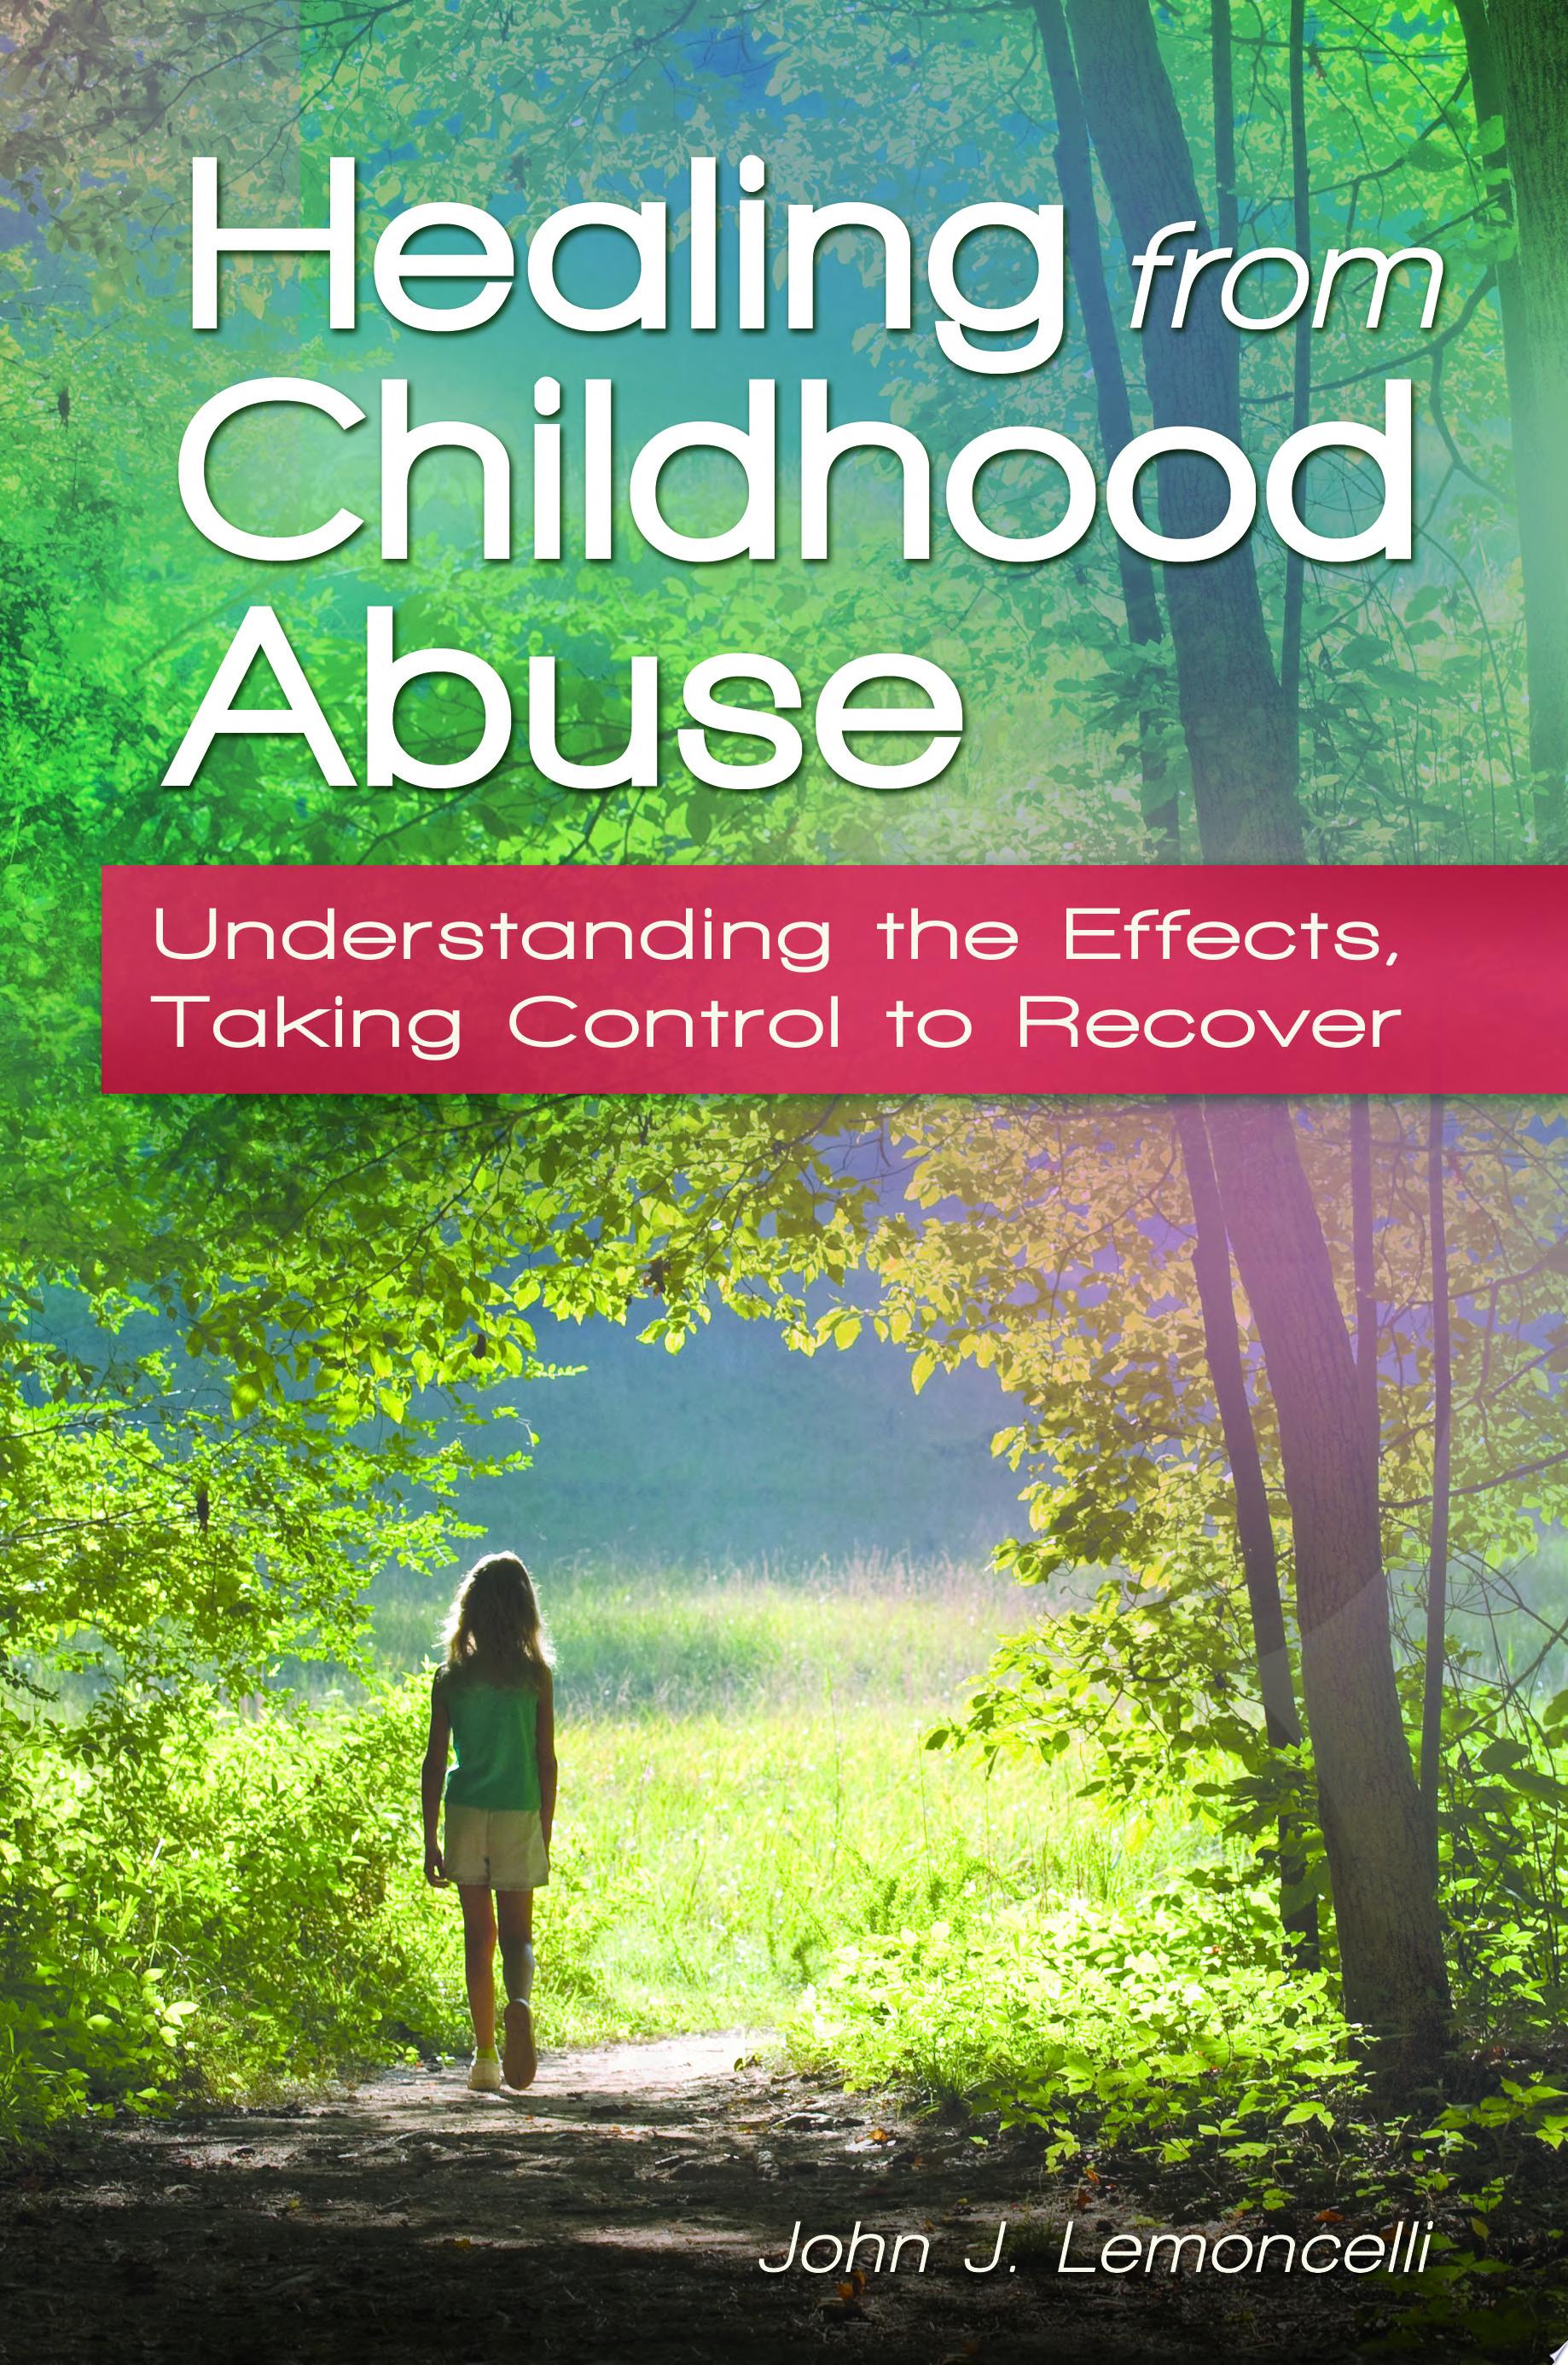 Image for "Healing from Childhood Abuse"